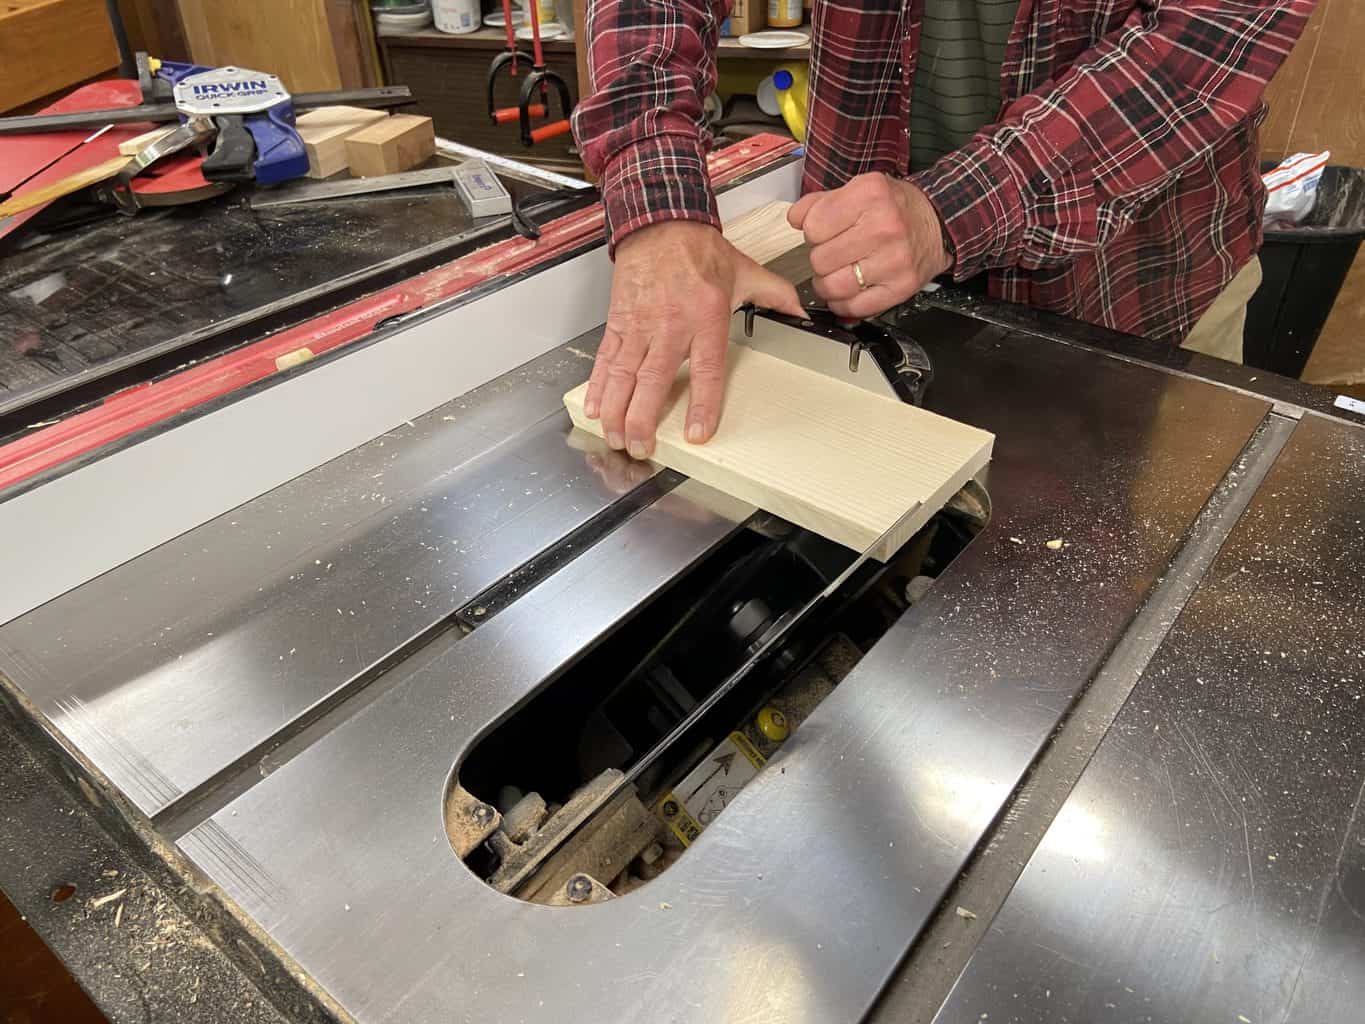 Man showing how to make a jointer jig for a table saw